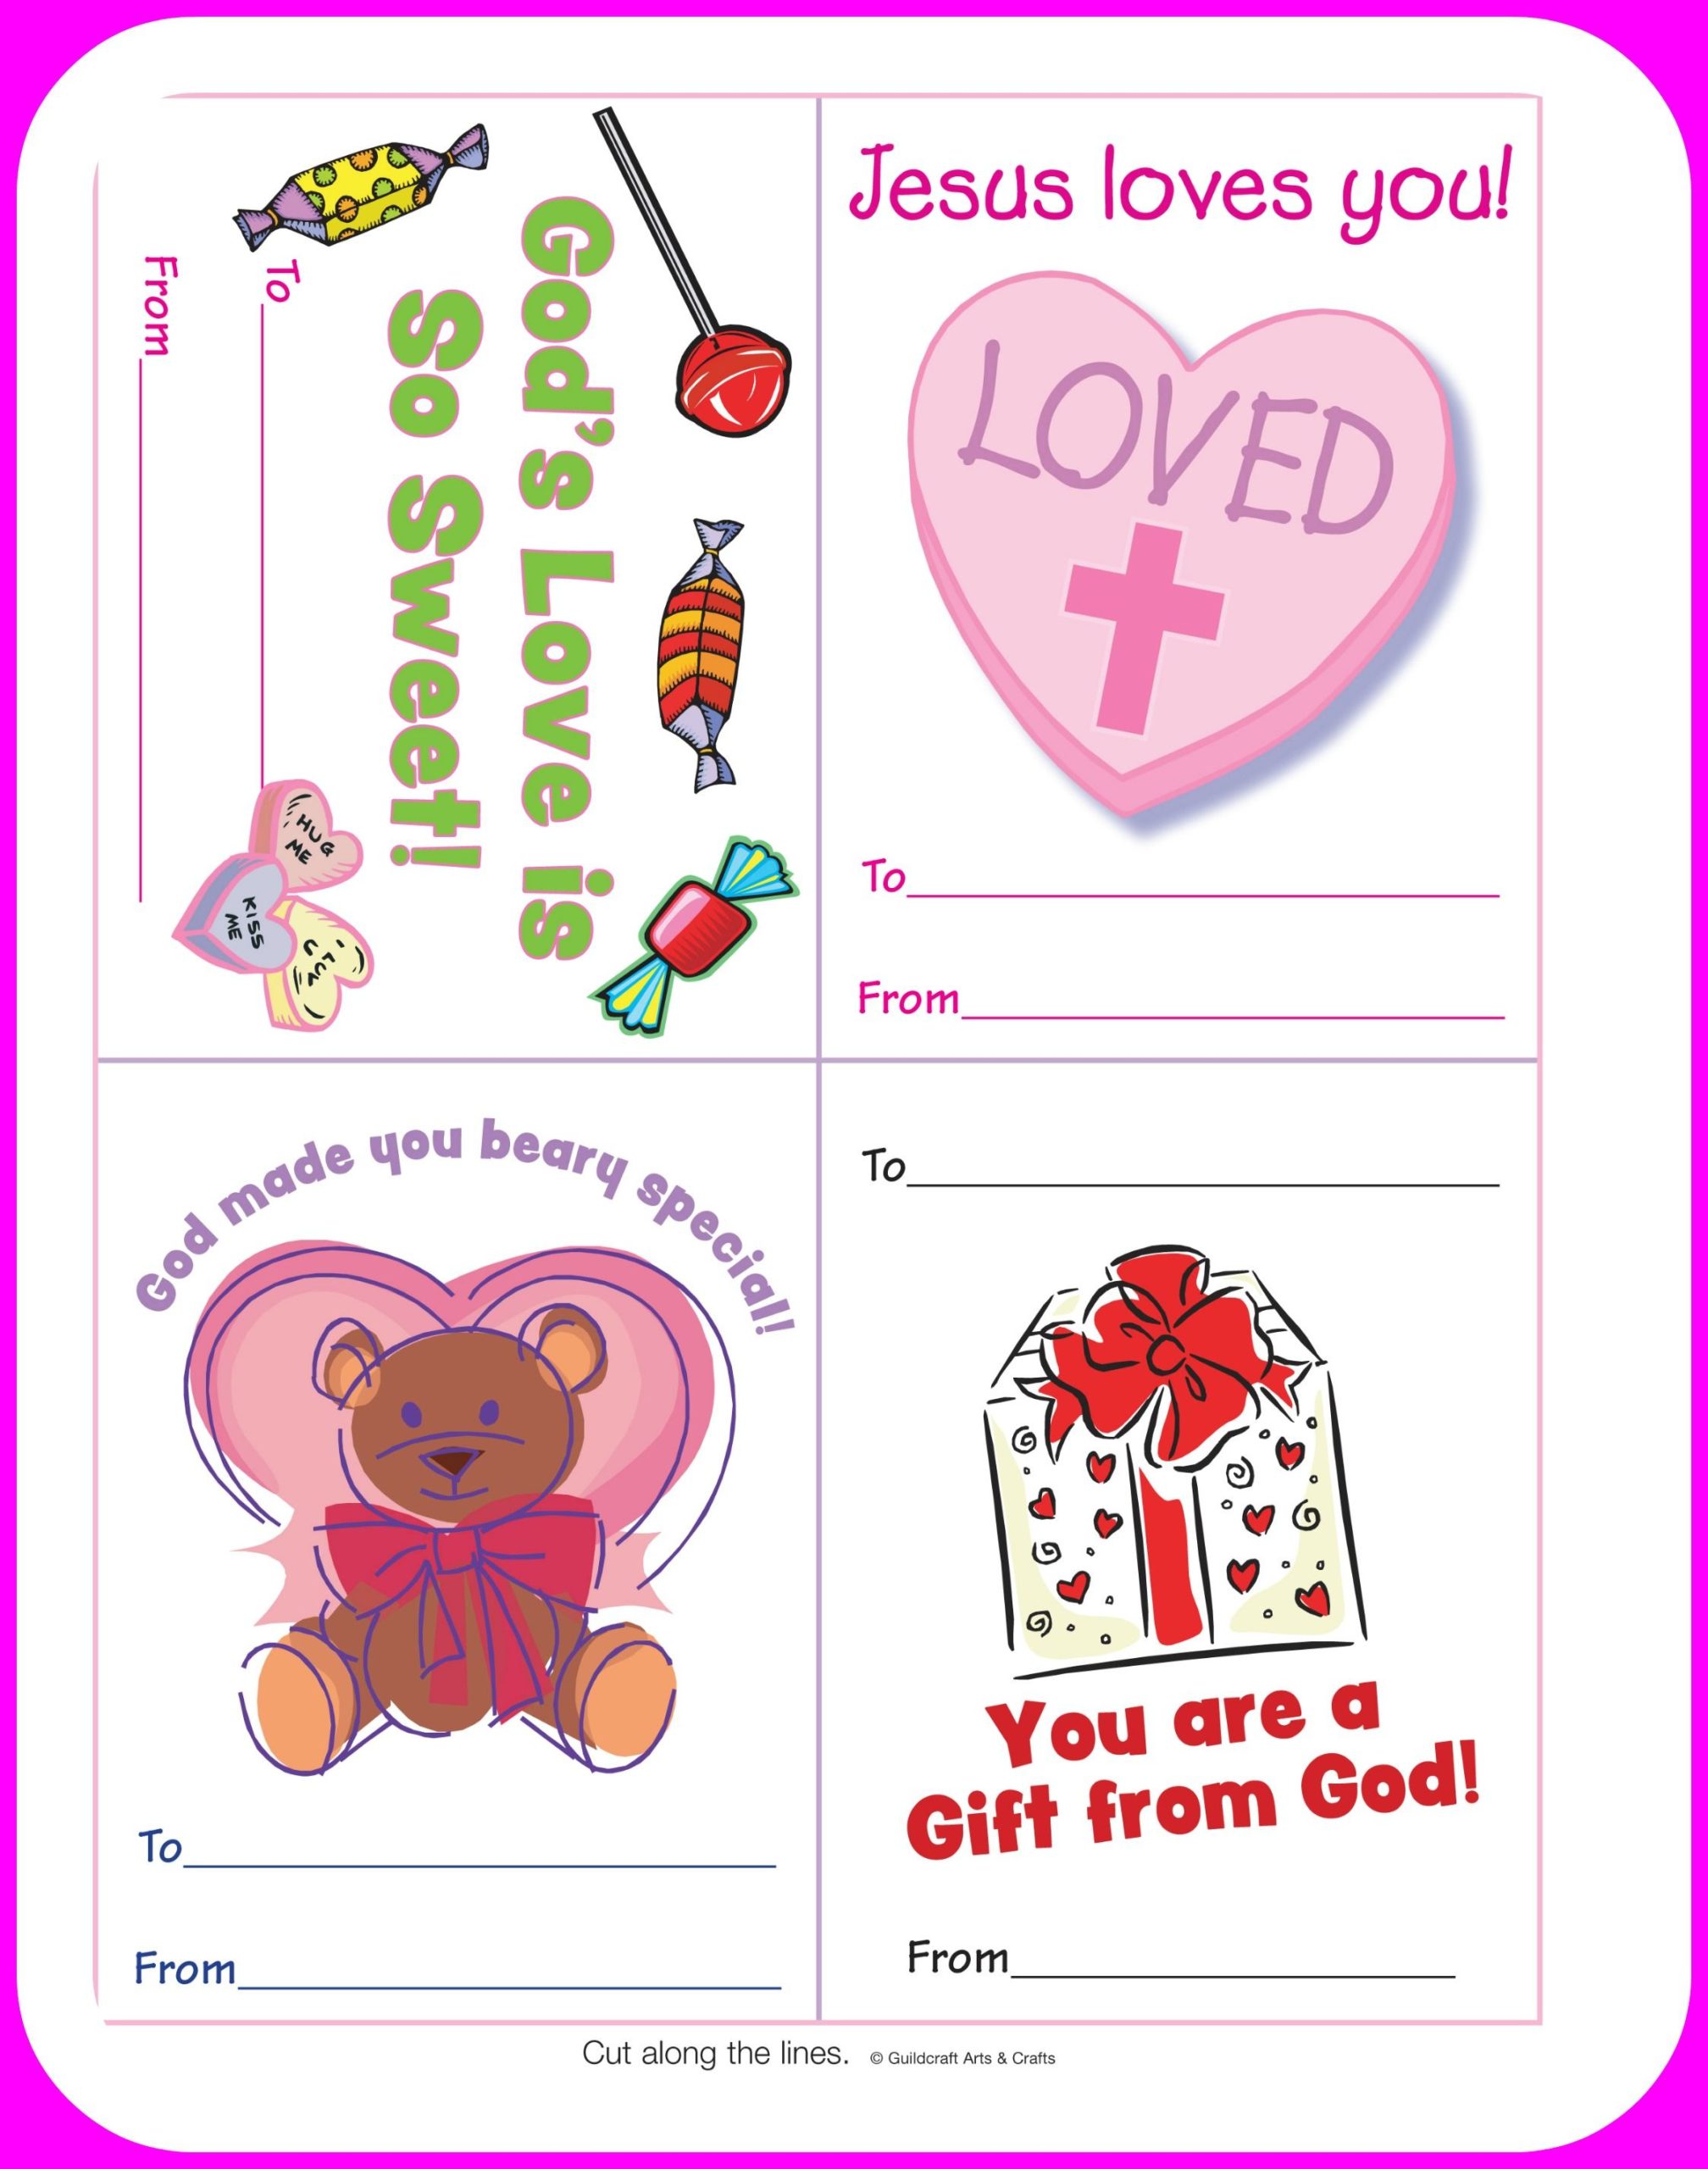 Free Printable: Christian Valentine #39 s Day Cards